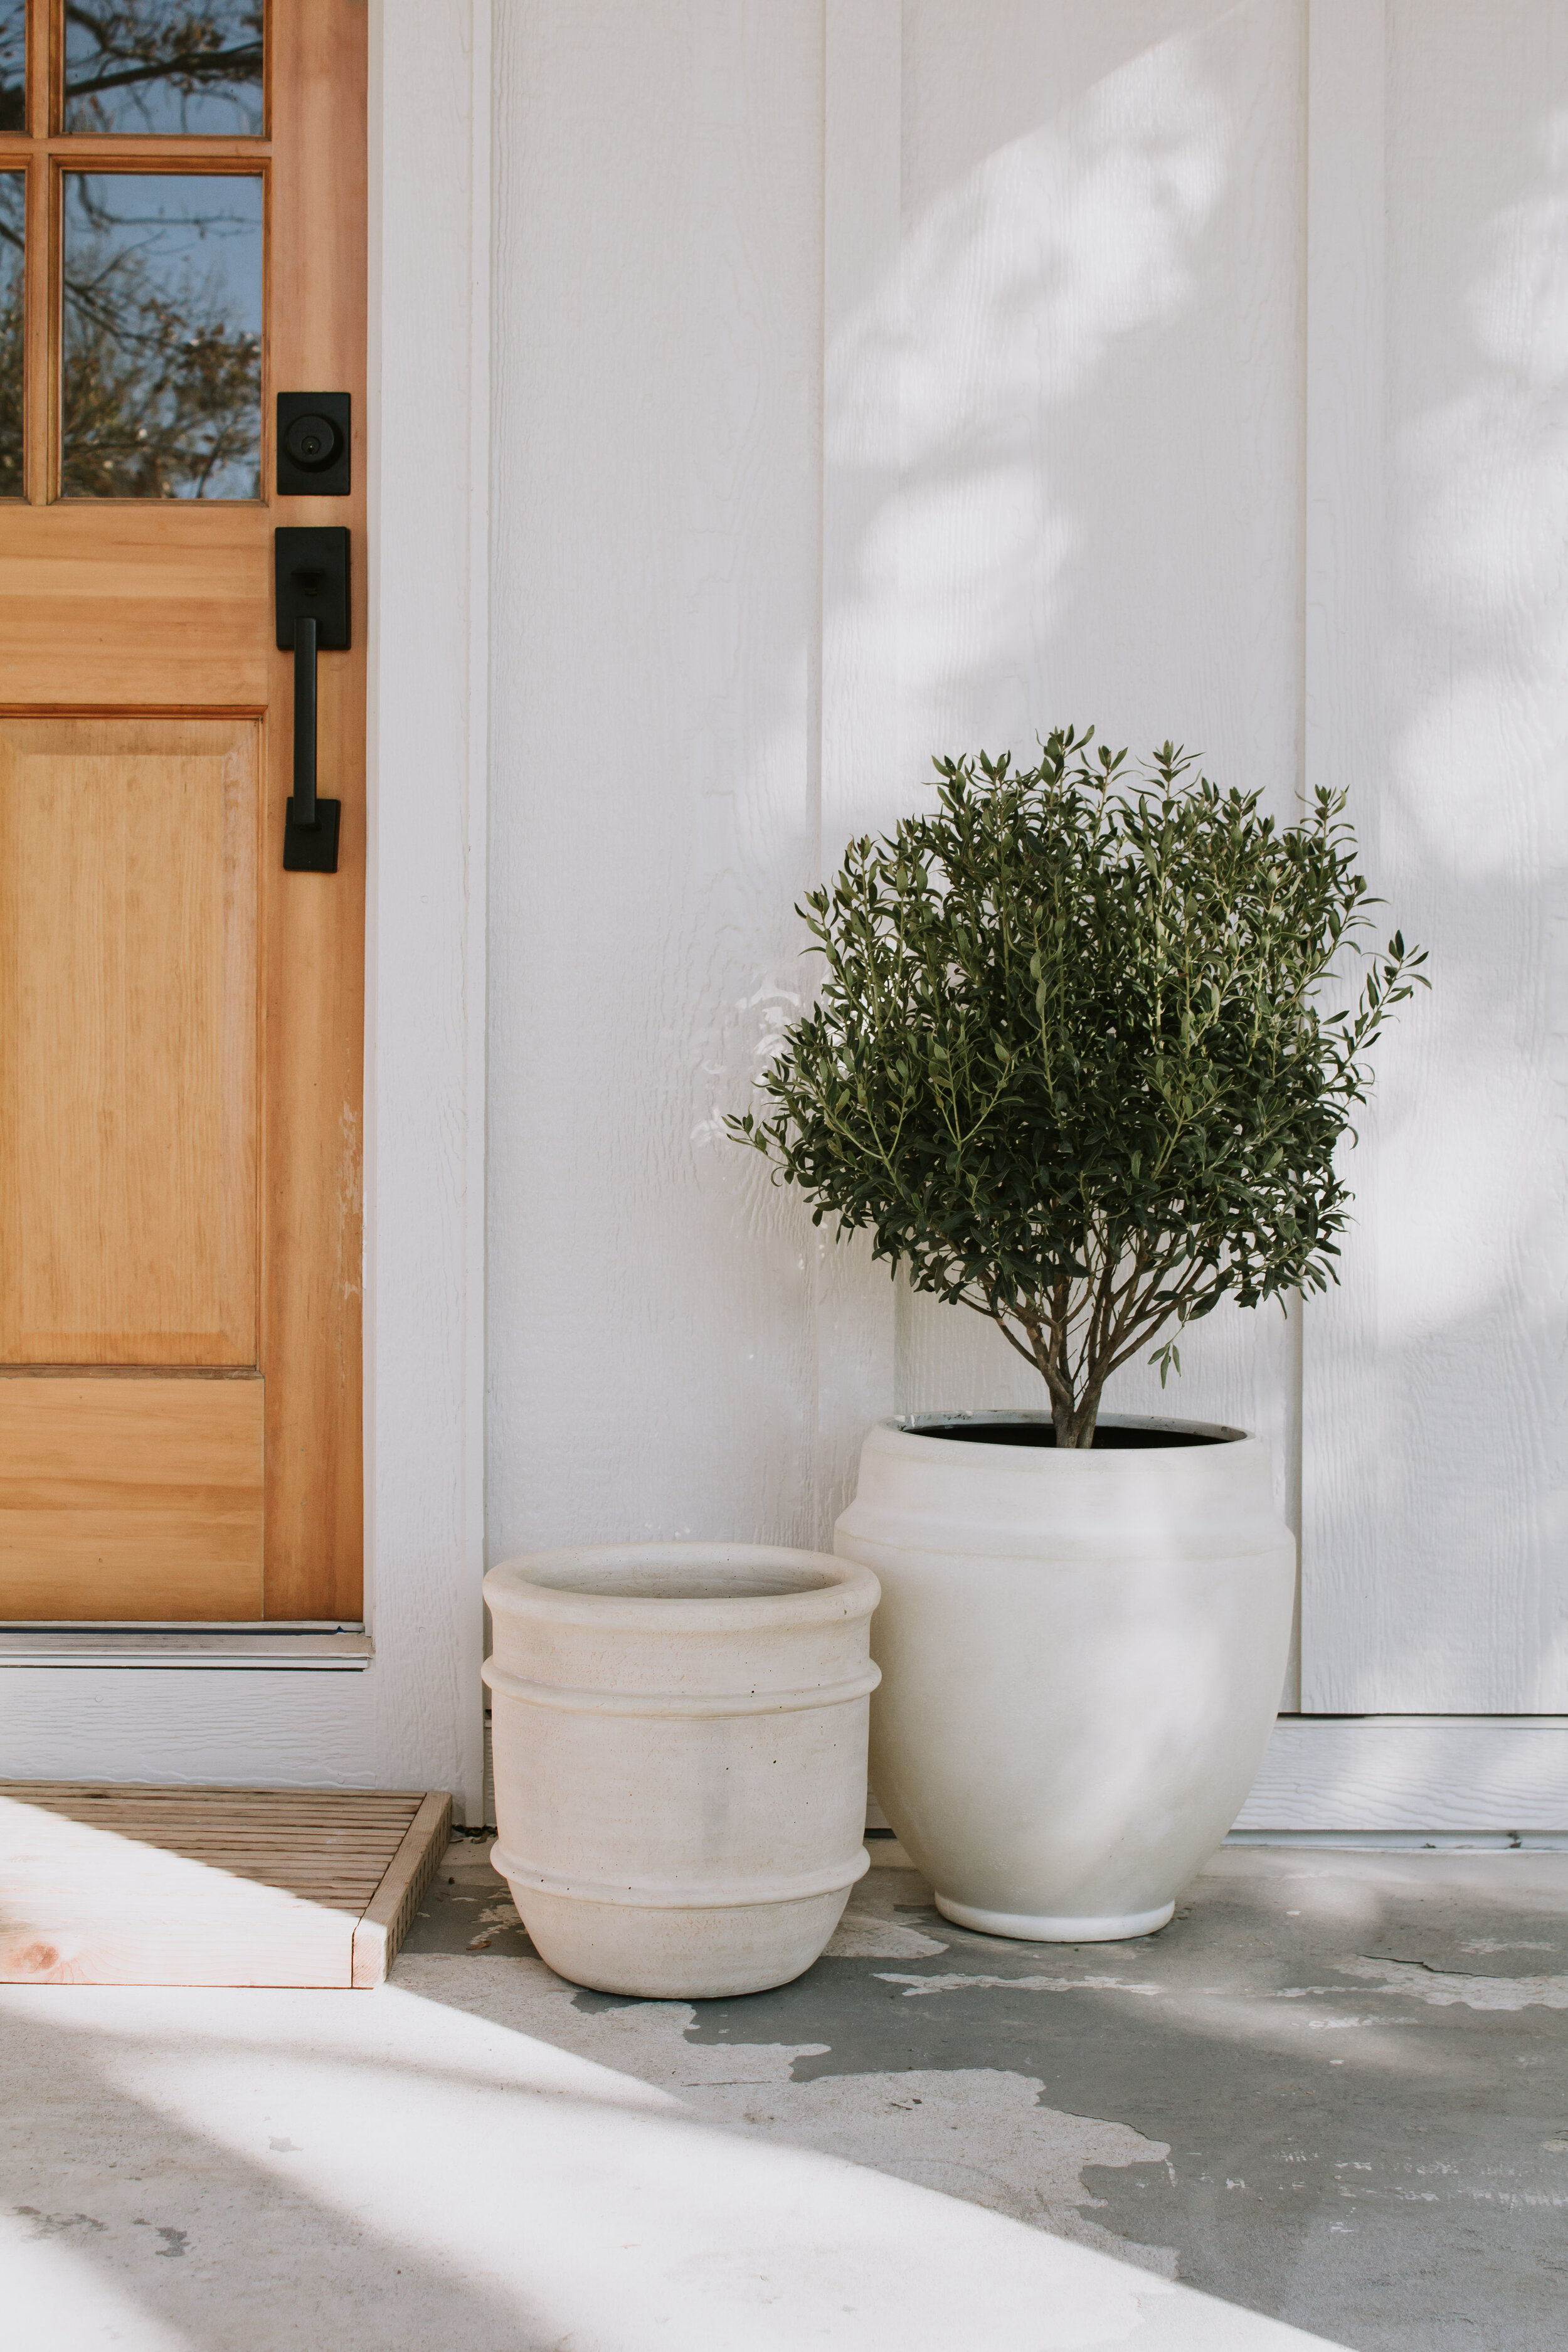 My Outdoor Pots + Planters Plus 15 Indoor/outdoor pots - Nadine Stay | Aged and weathered outdoor pots, terra cotta pots, and modern sphere planters. | Nadine Stay